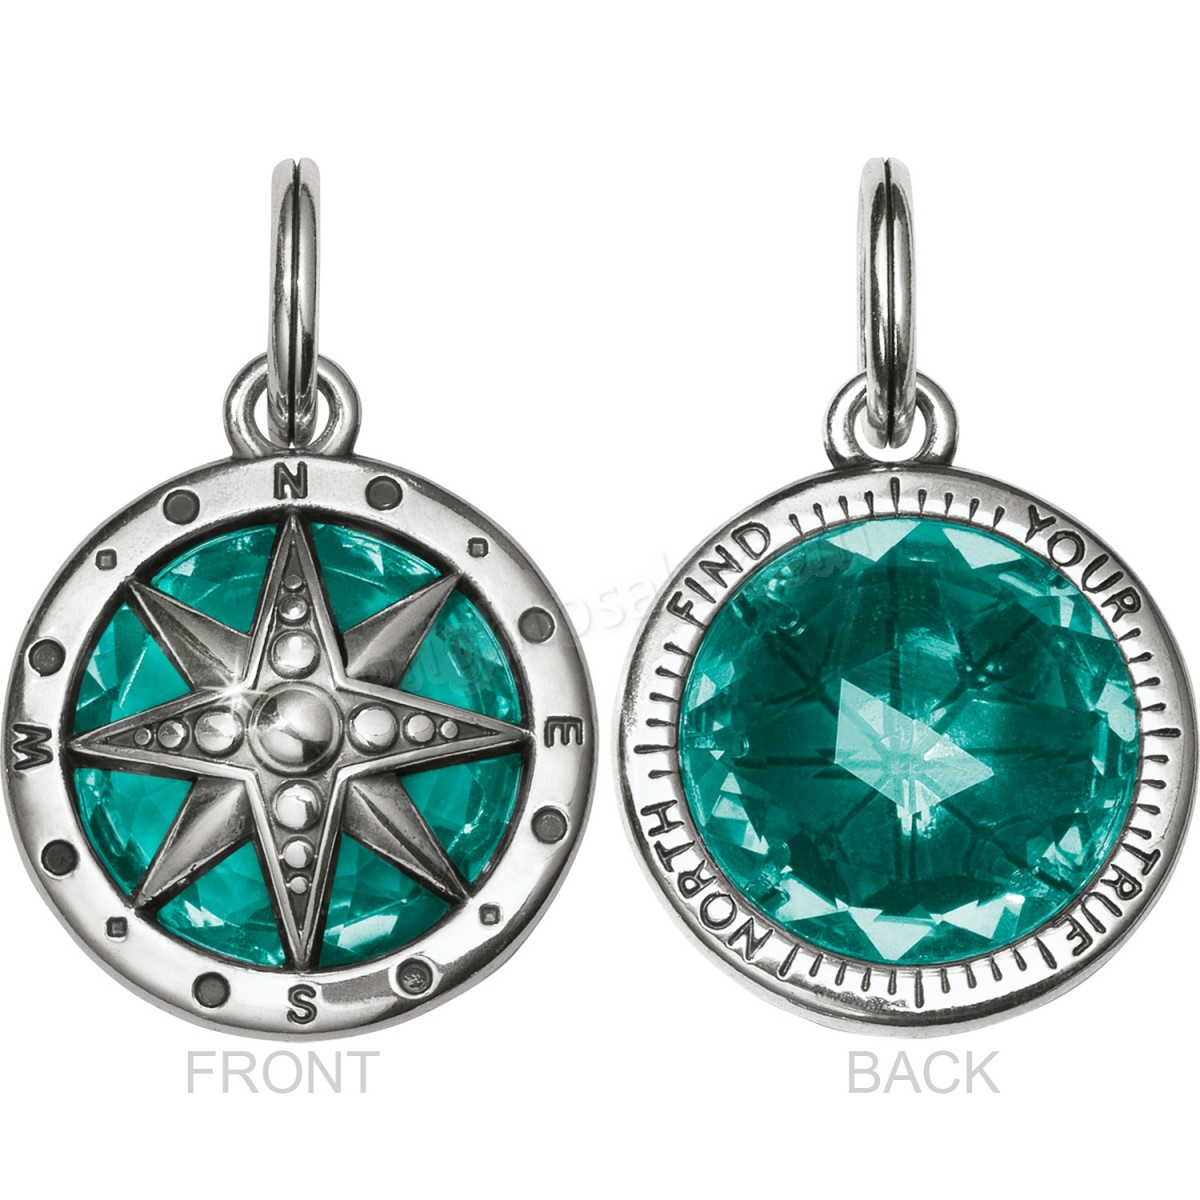 Brighton Collectibles & Online Discount Grow and Prosper Amulet Necklace Gift Set - -2